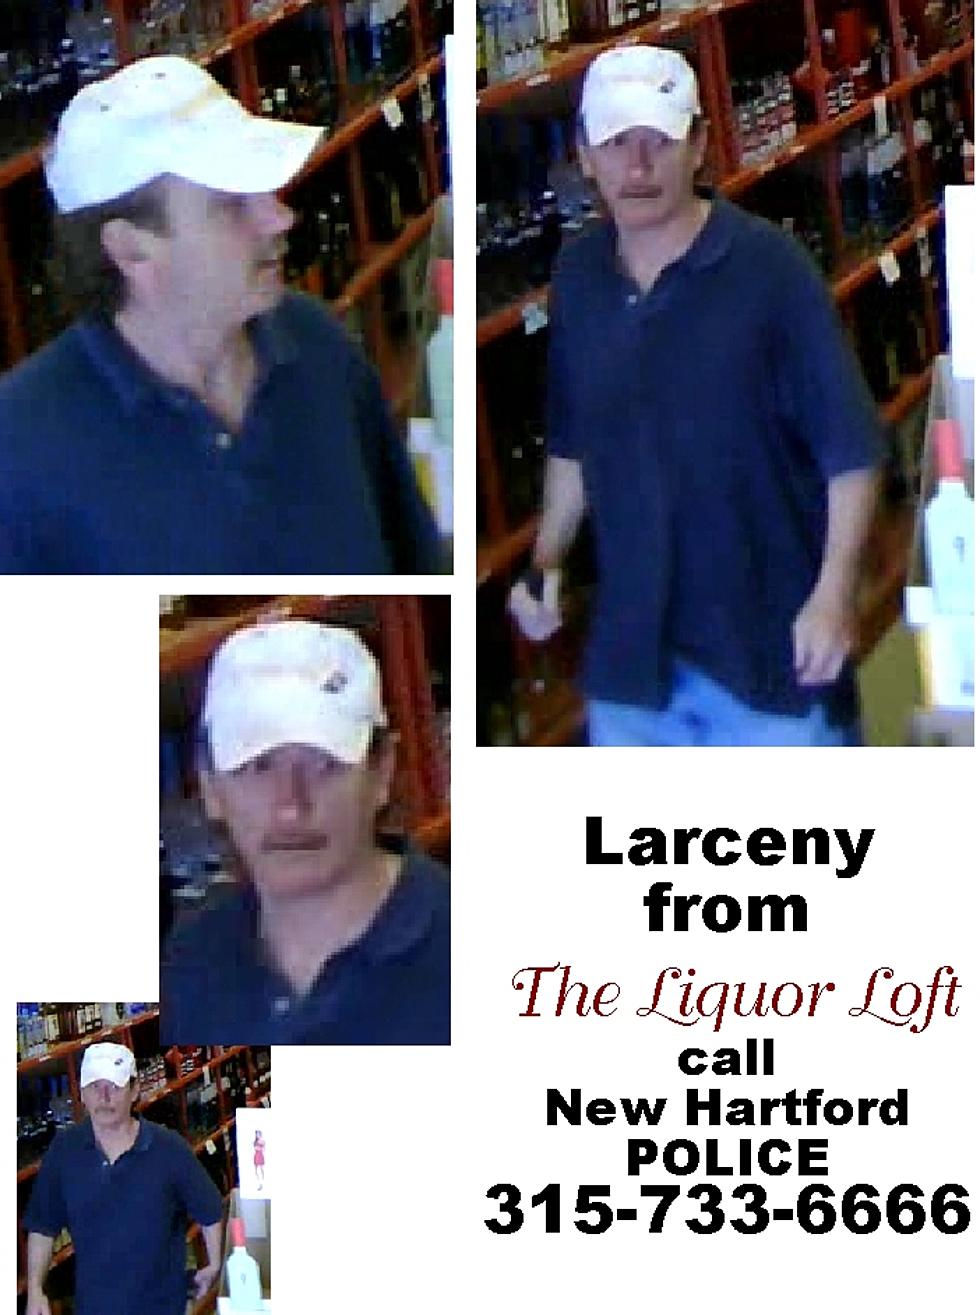 Shoplifter Sought By New Hartford Police